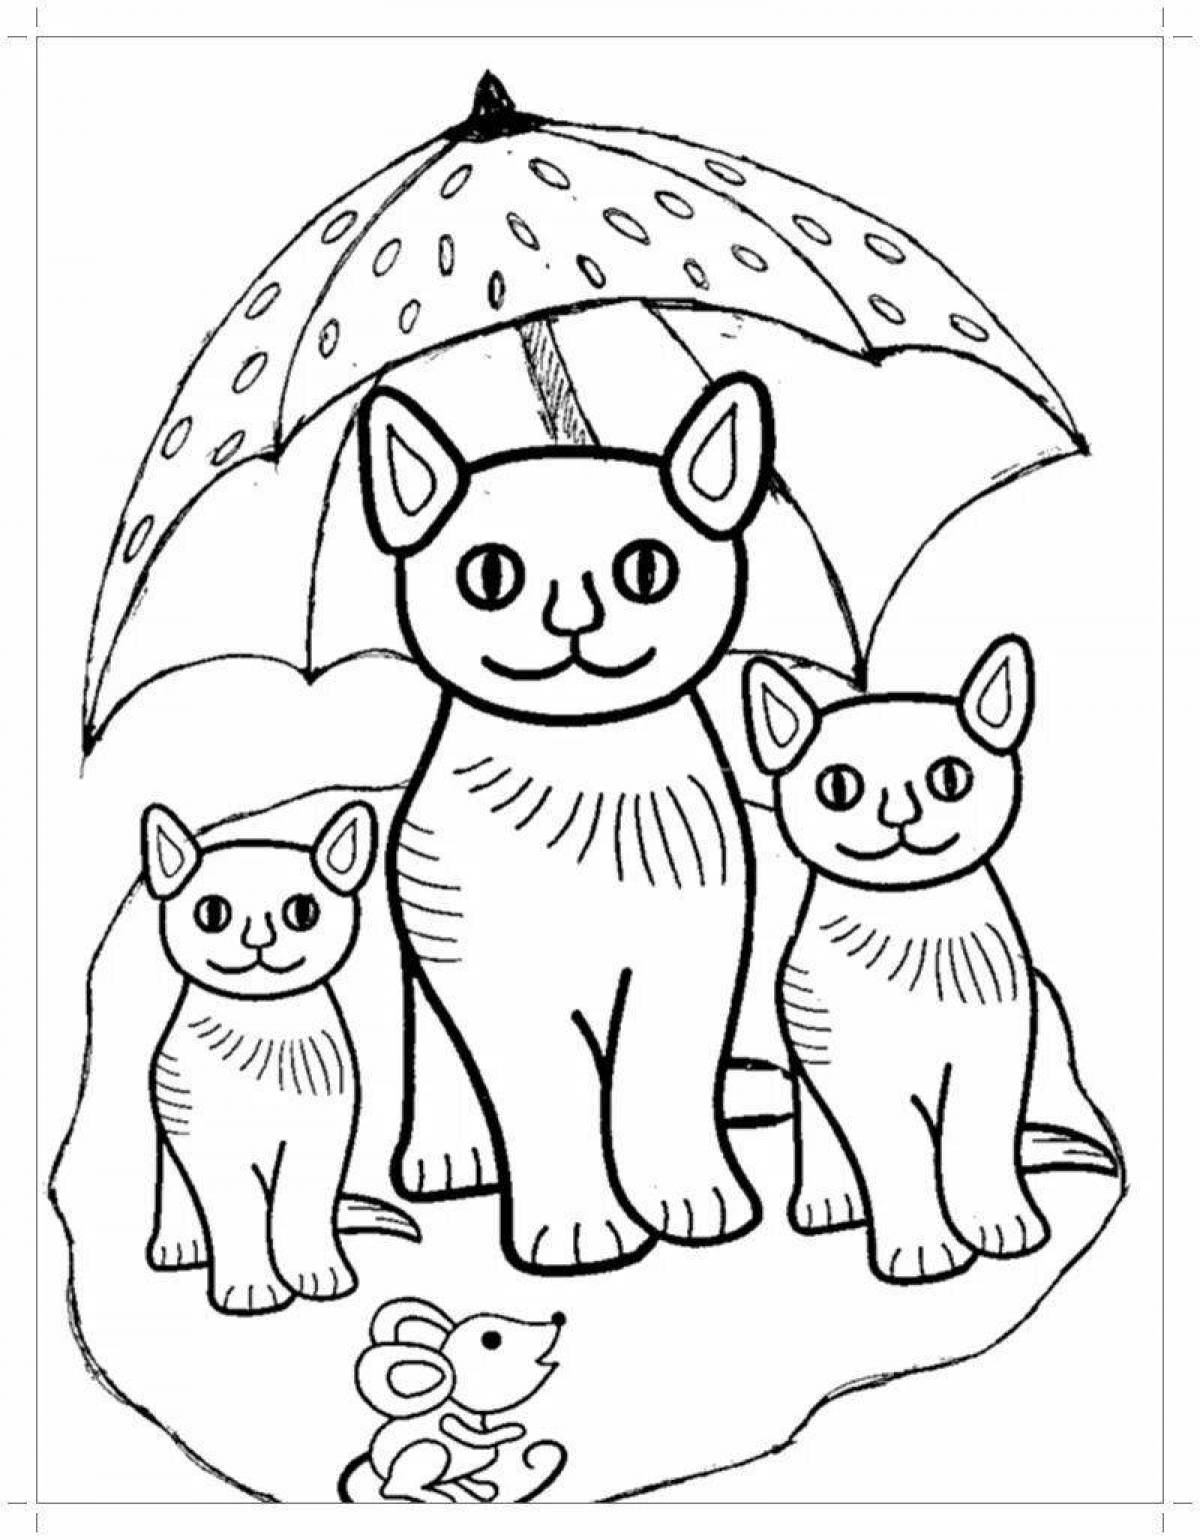 Coloring 3 kittens